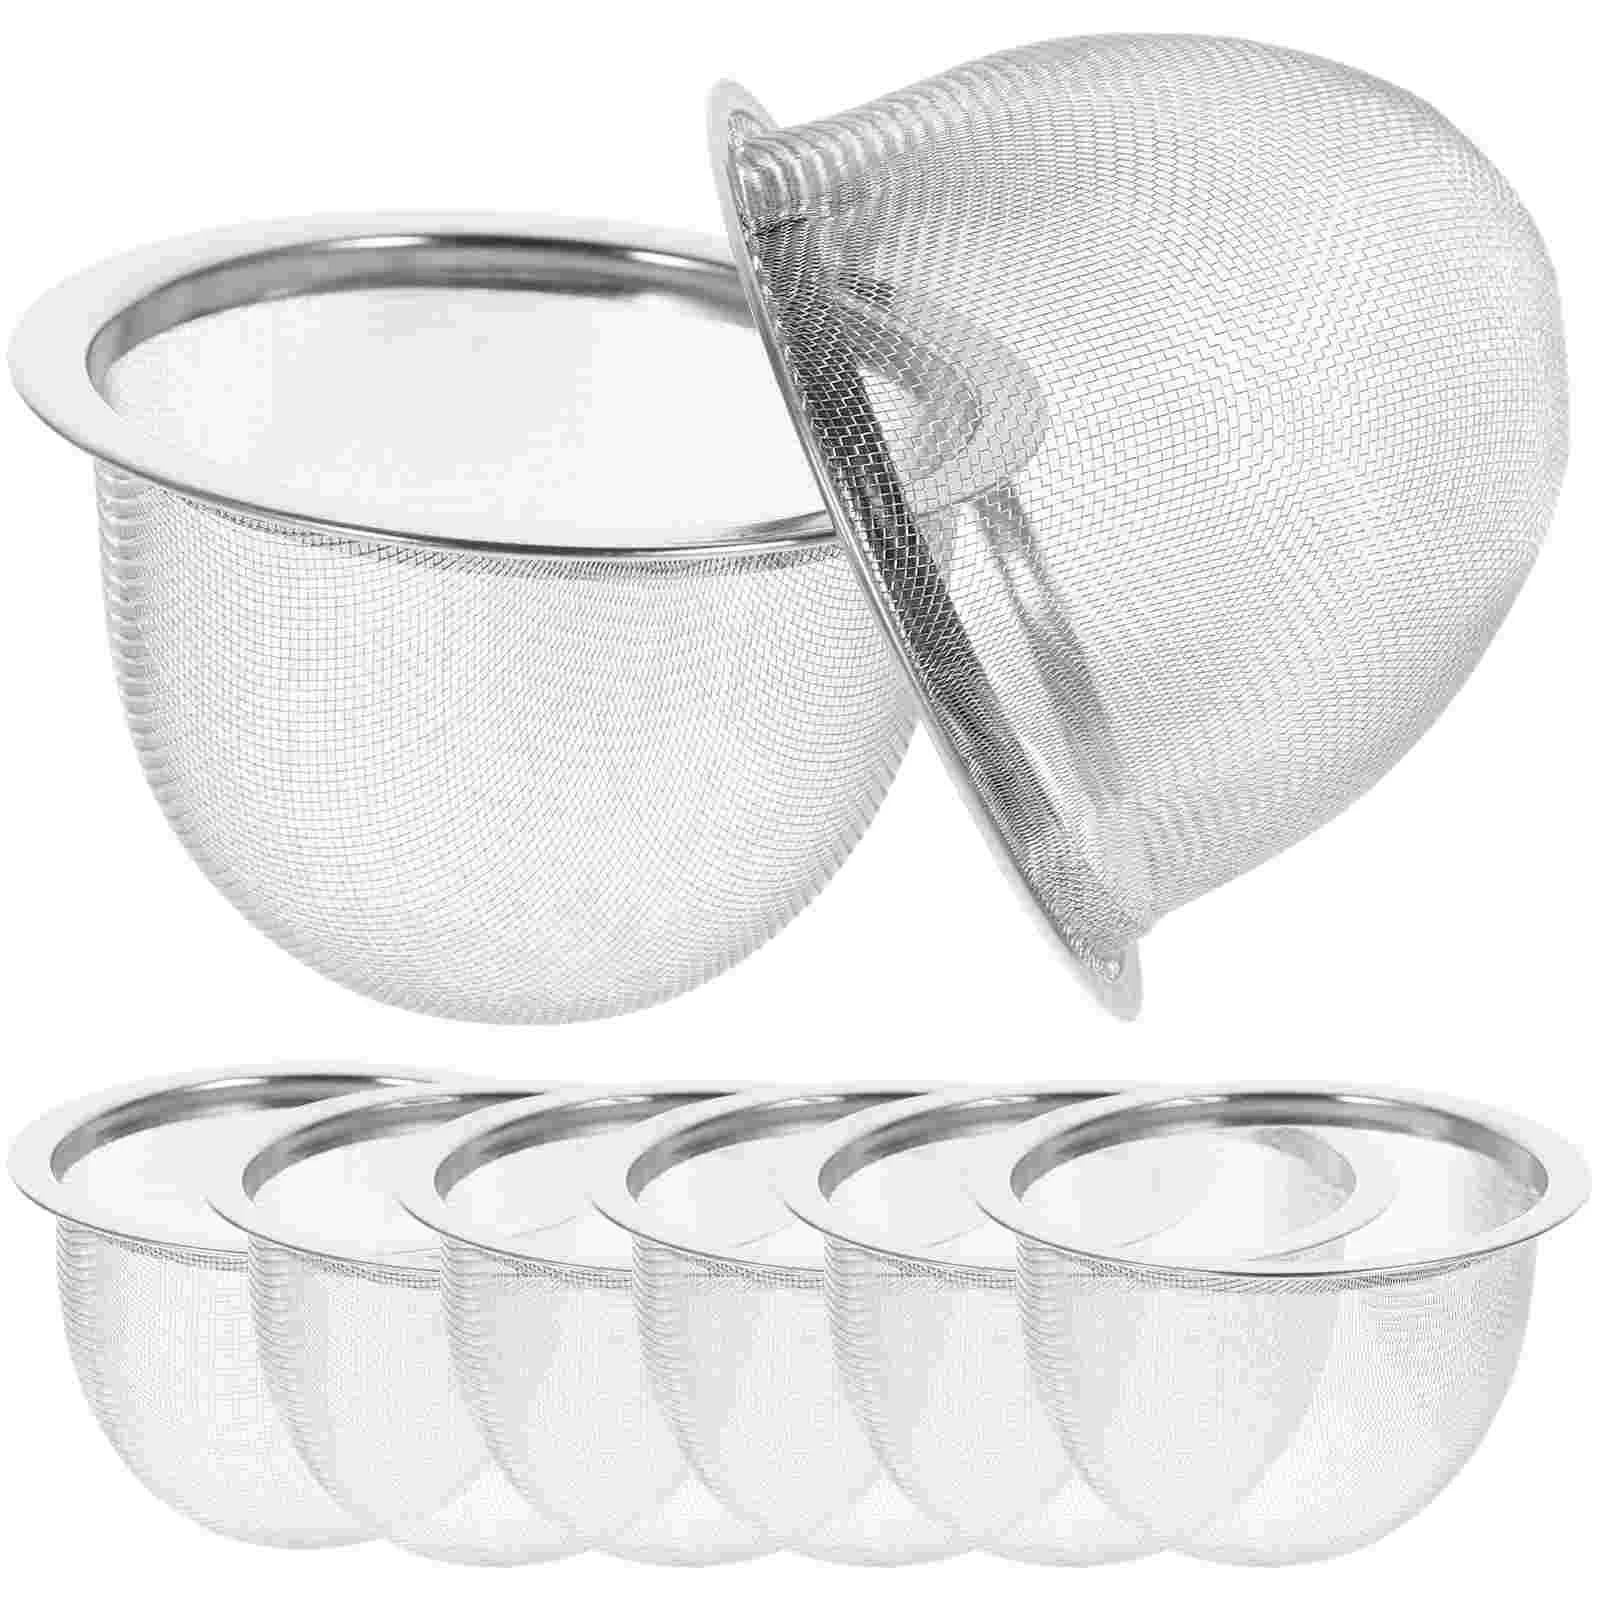 

Tea Filter Metal Infuser Stainless Steel Tea Strainer Portable Cup Accessory Sturdy Tea Strainer for Home Office Kitchen